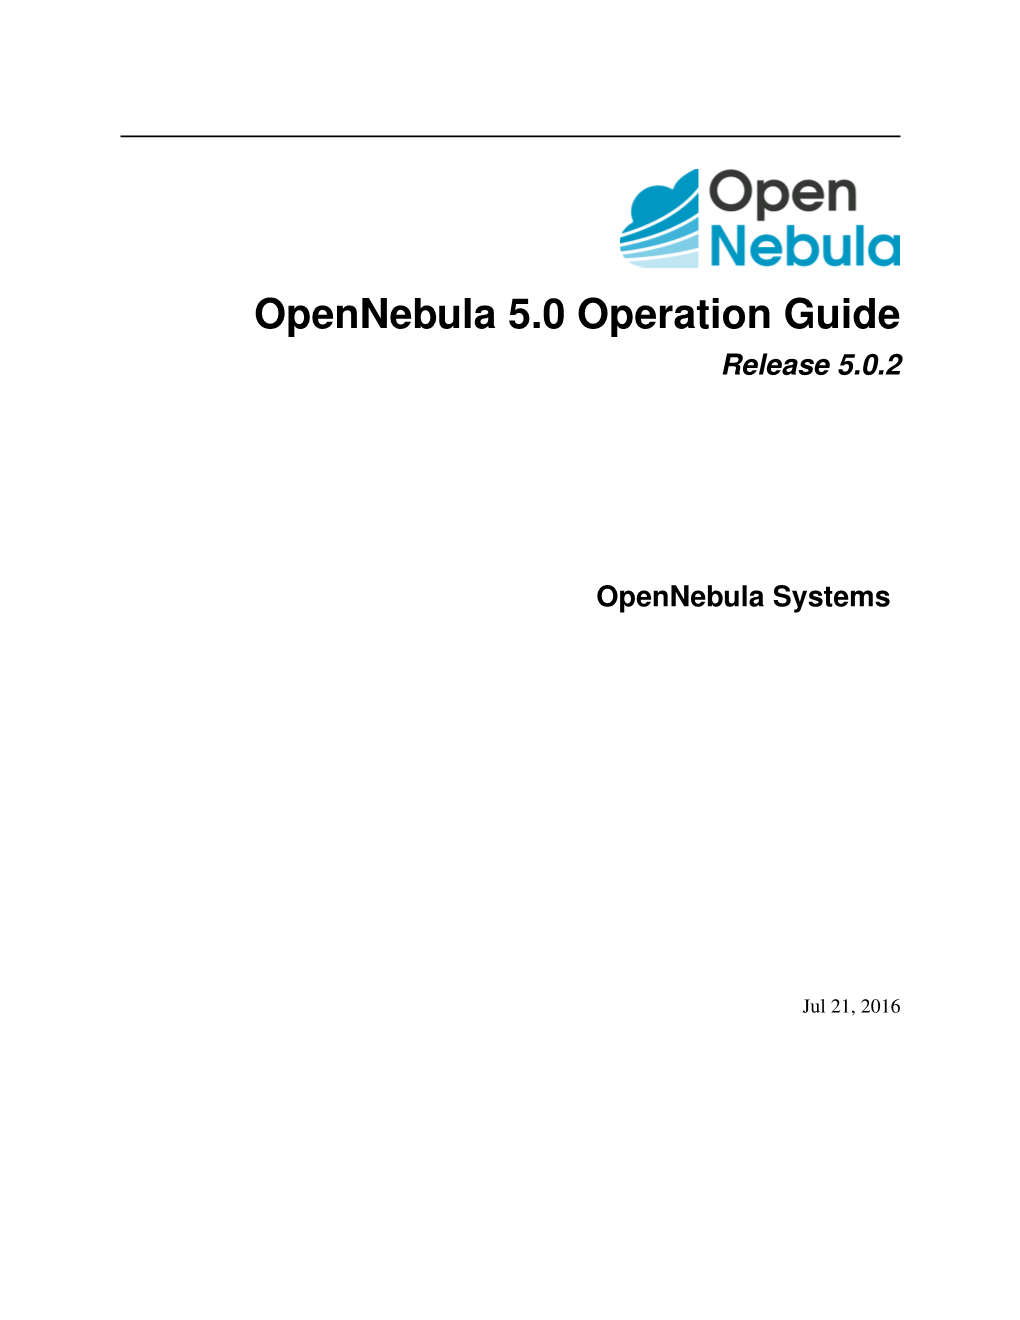 Opennebula 5.0 Operation Guide Release 5.0.2